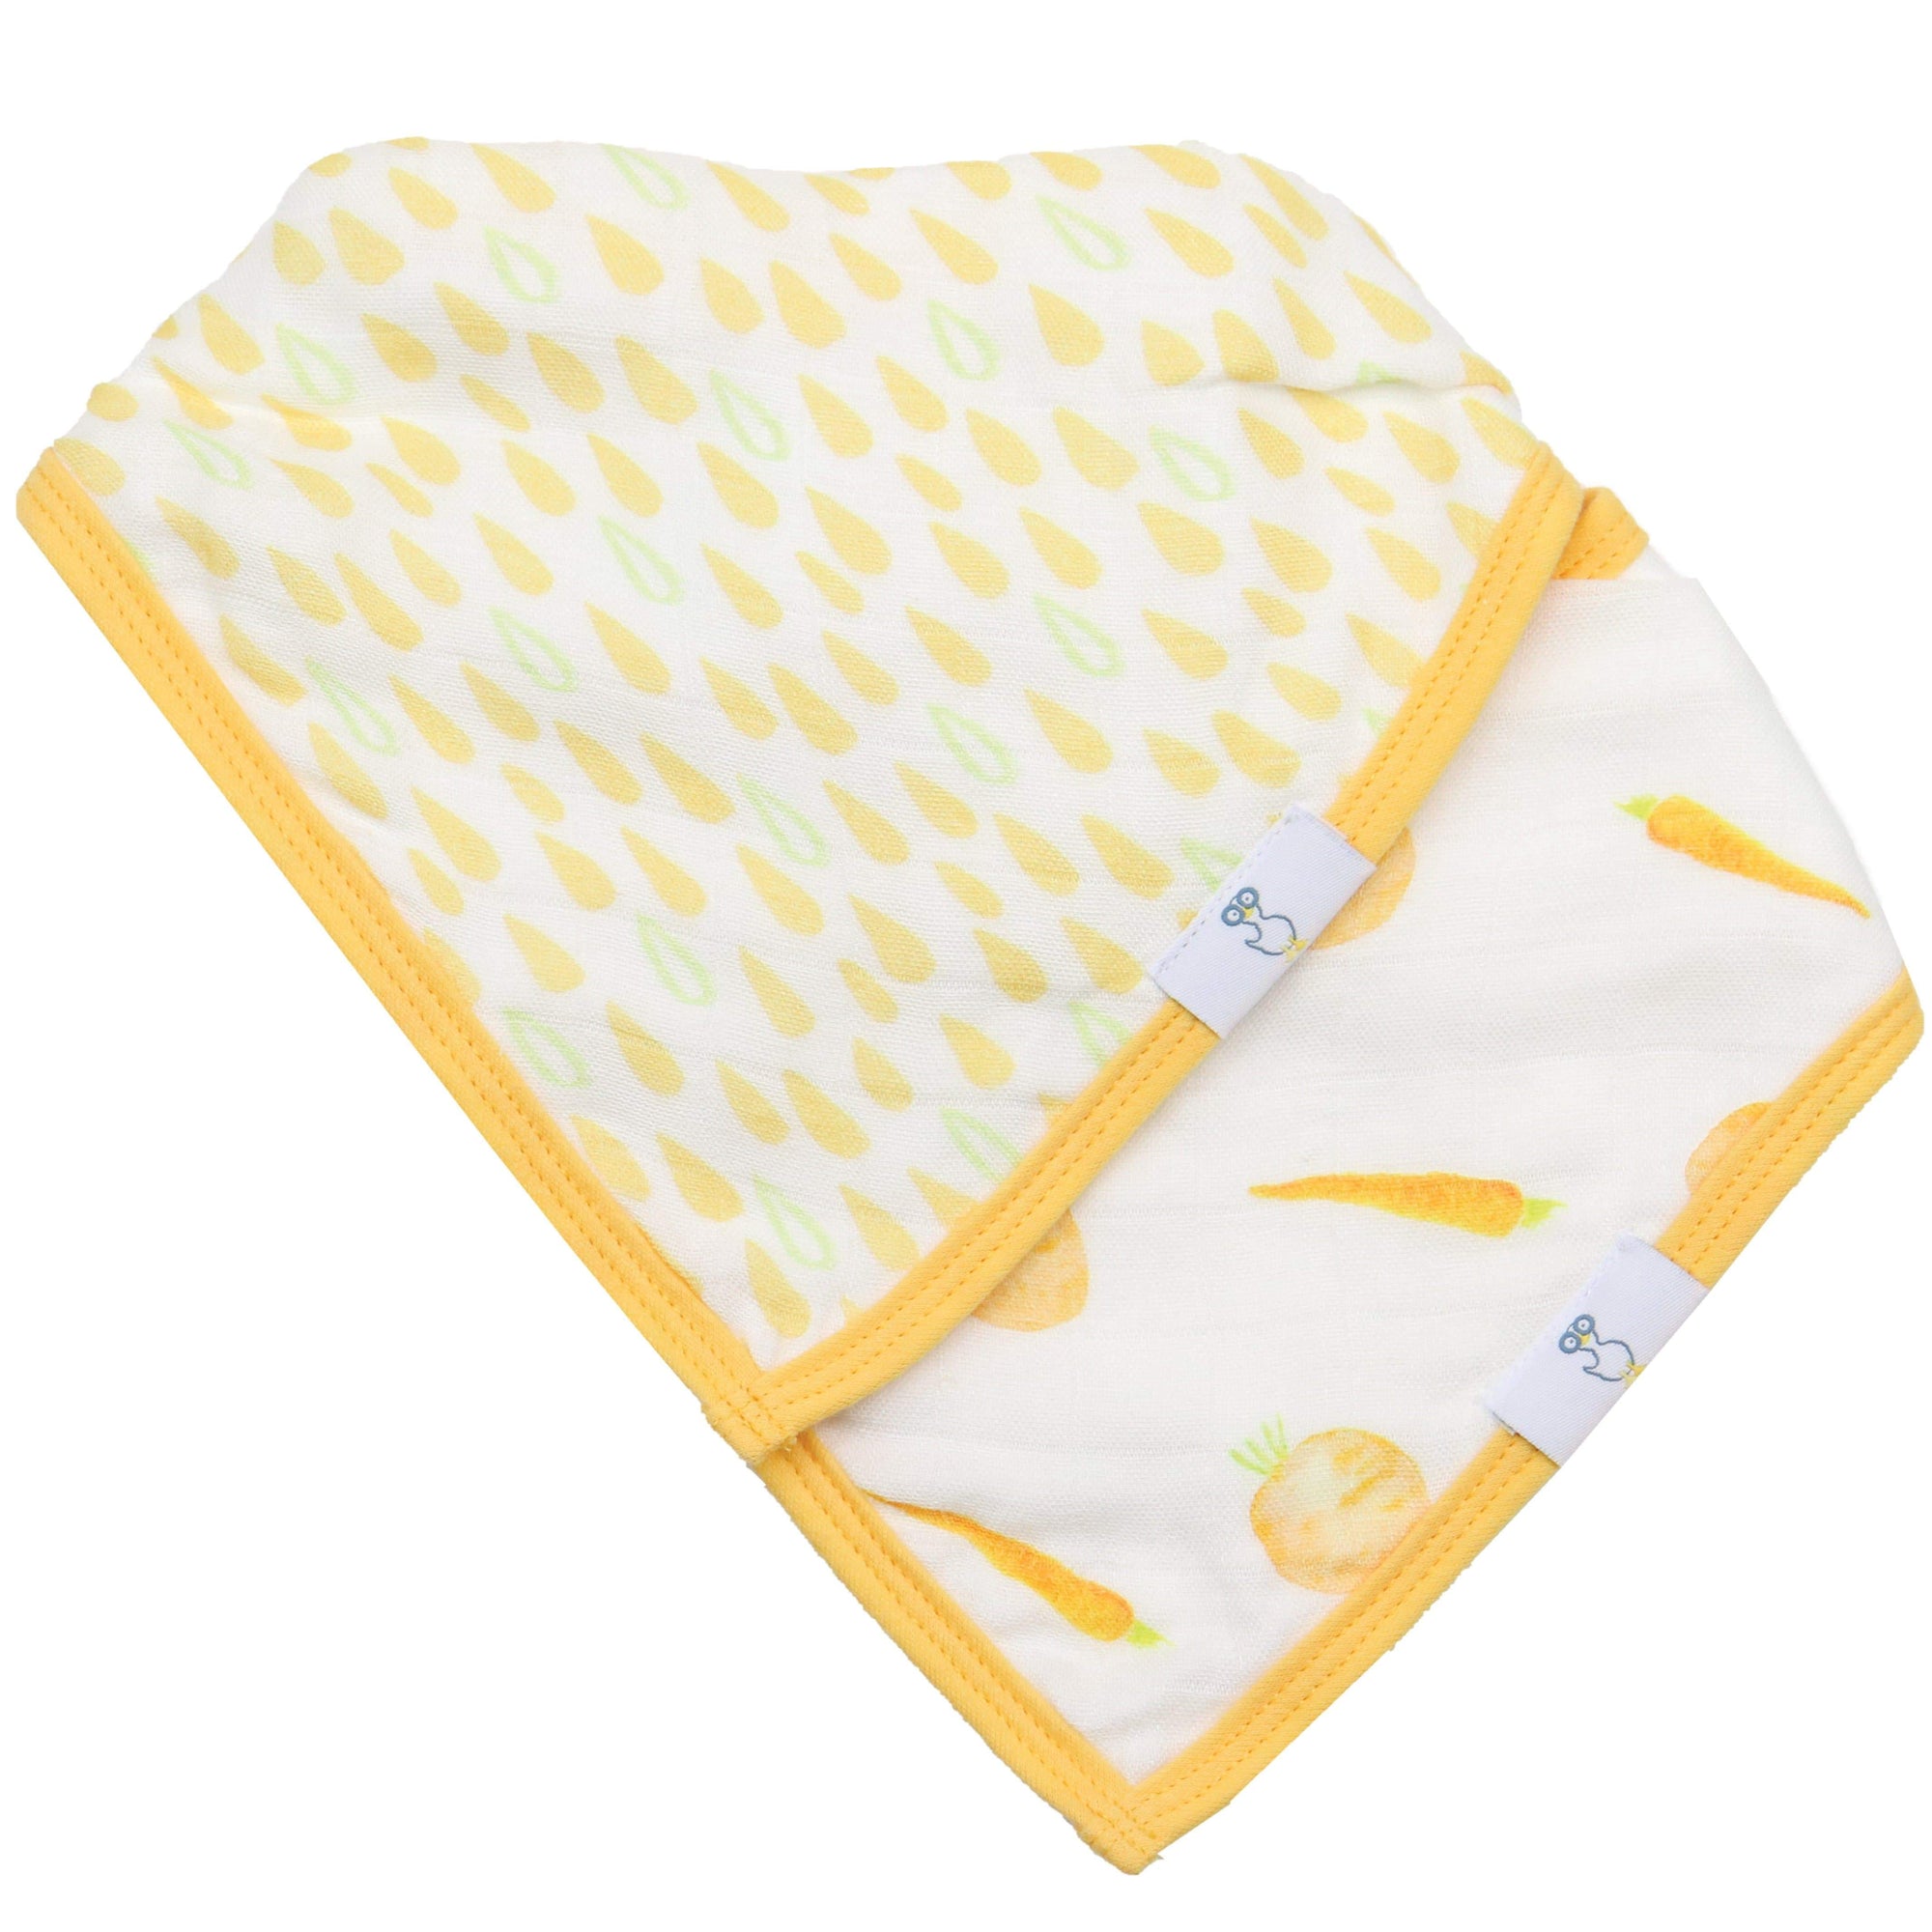 Goosewaddle 2 Pack Muslin & Terry Cloth Bib Set, Carrots and Shapes